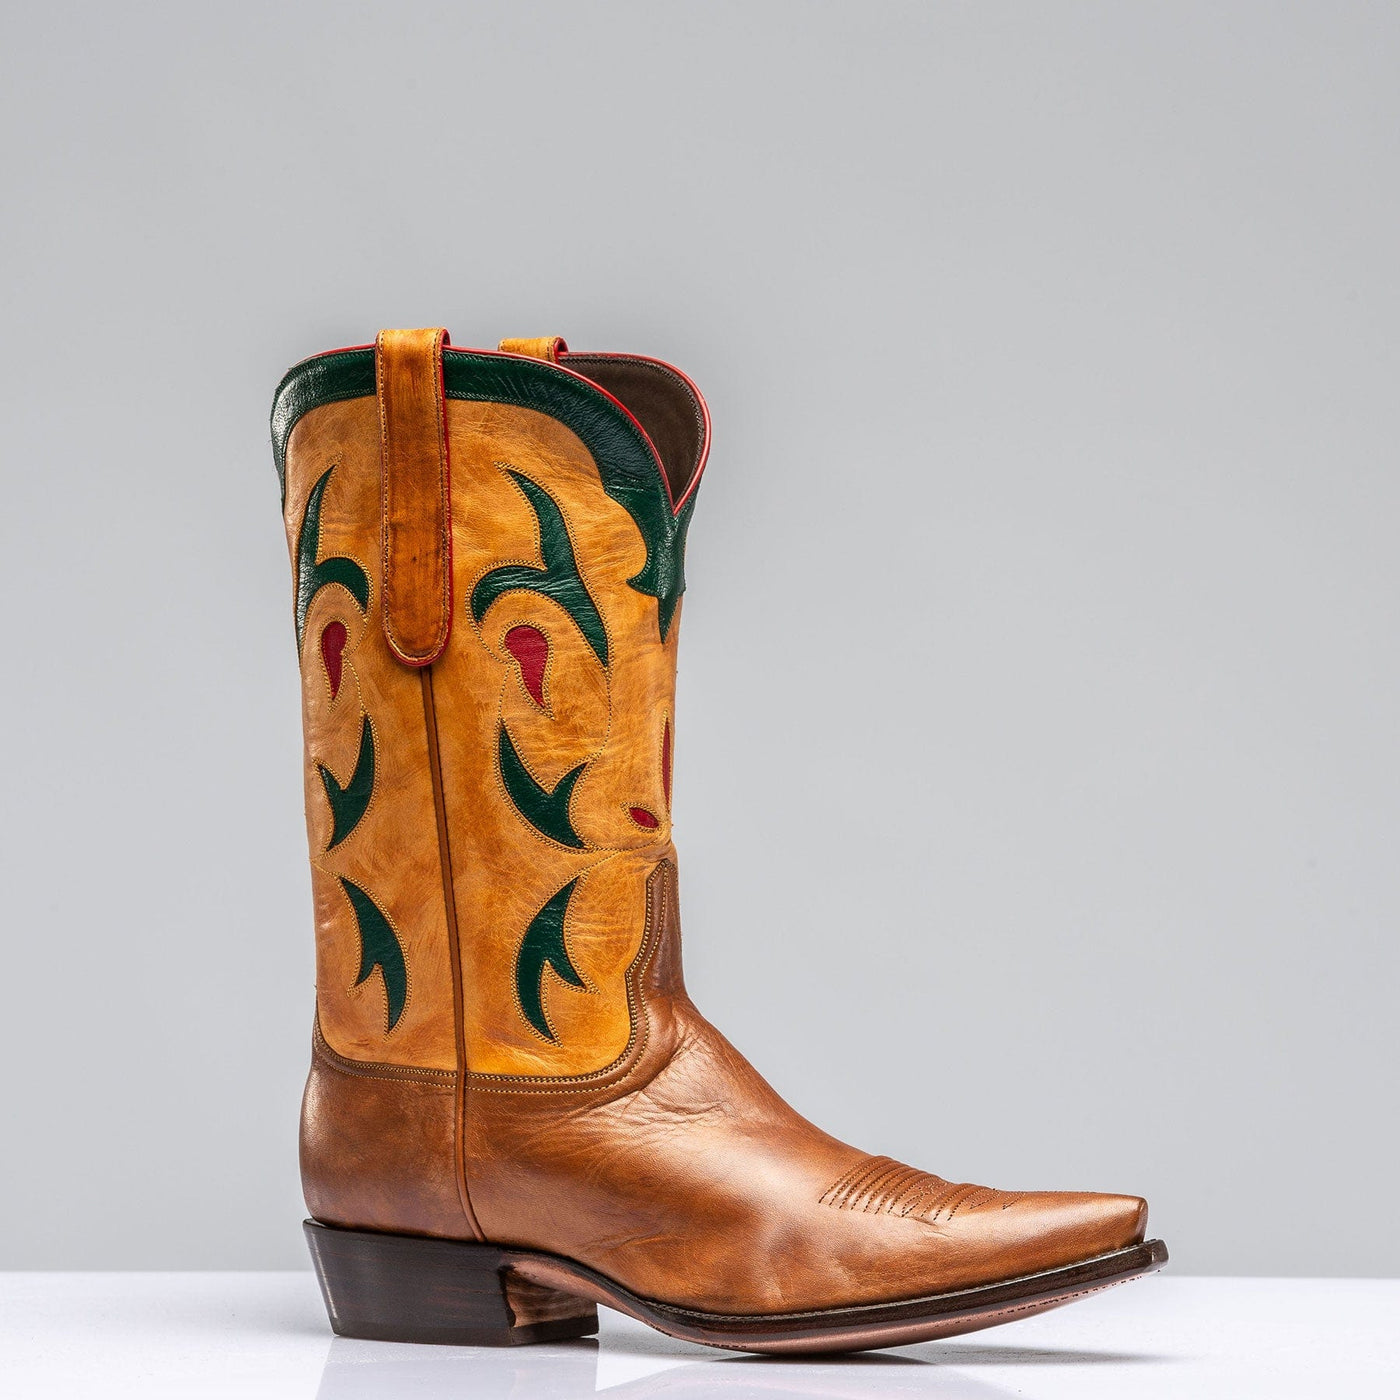 Ranch Hand Vintage Inlaid Boots - AXEL'S